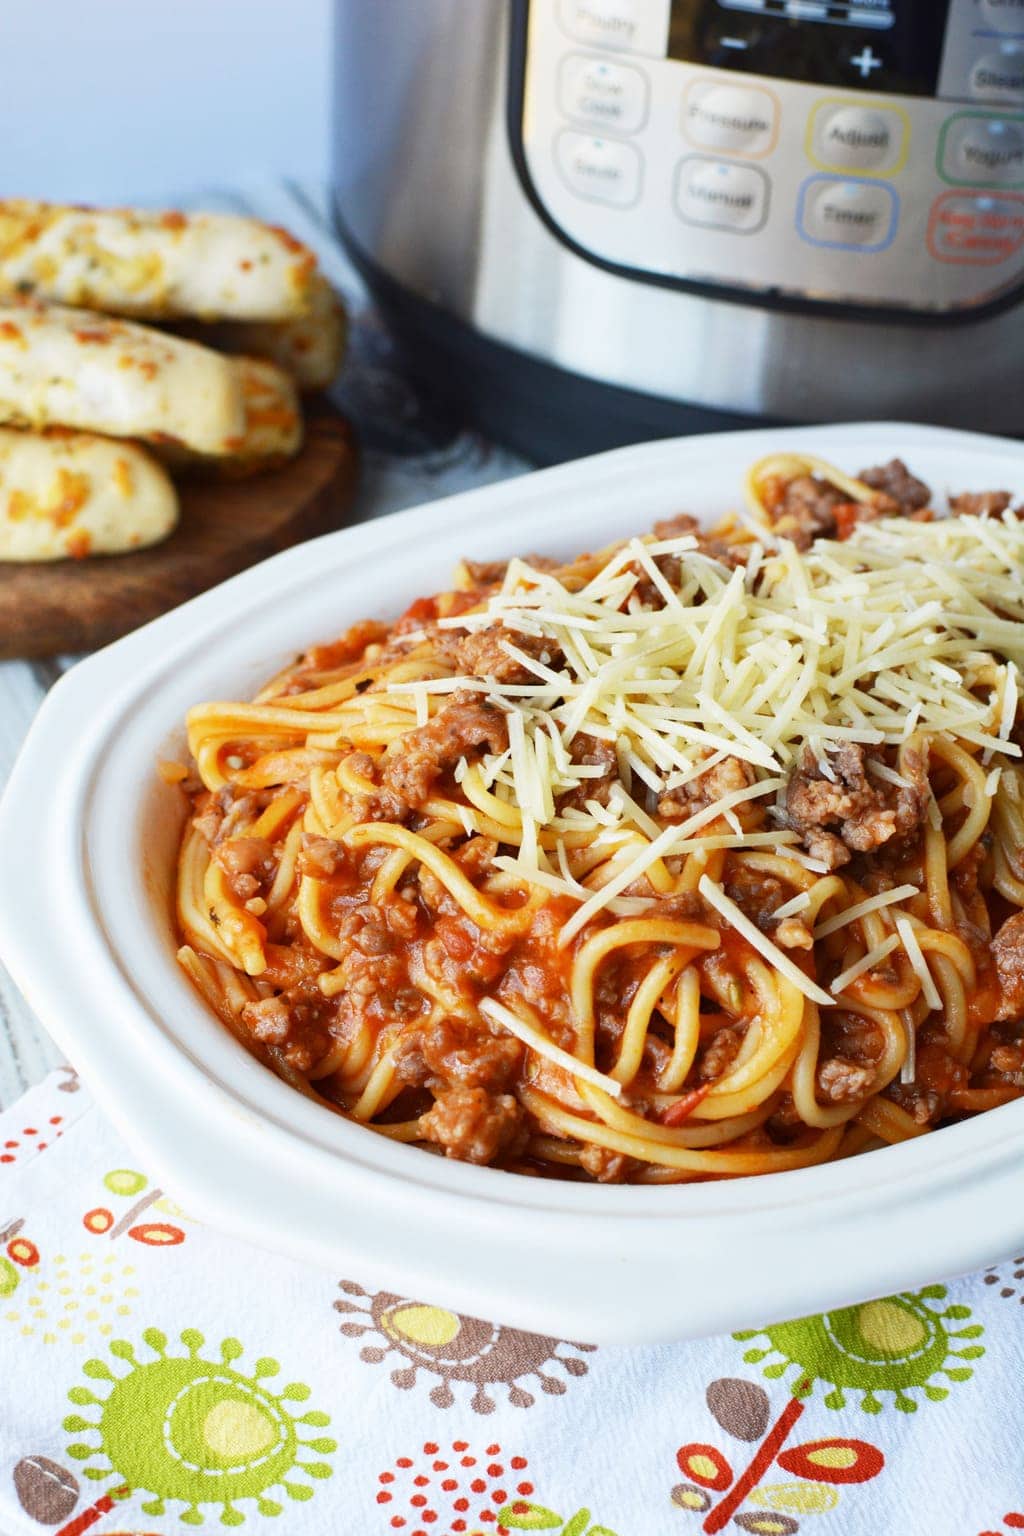 This simple Instant Pot Spaghetti With Italian Sausage recipe not only tastes amazing, it literally takes 10 minutes for everything from start to finish.